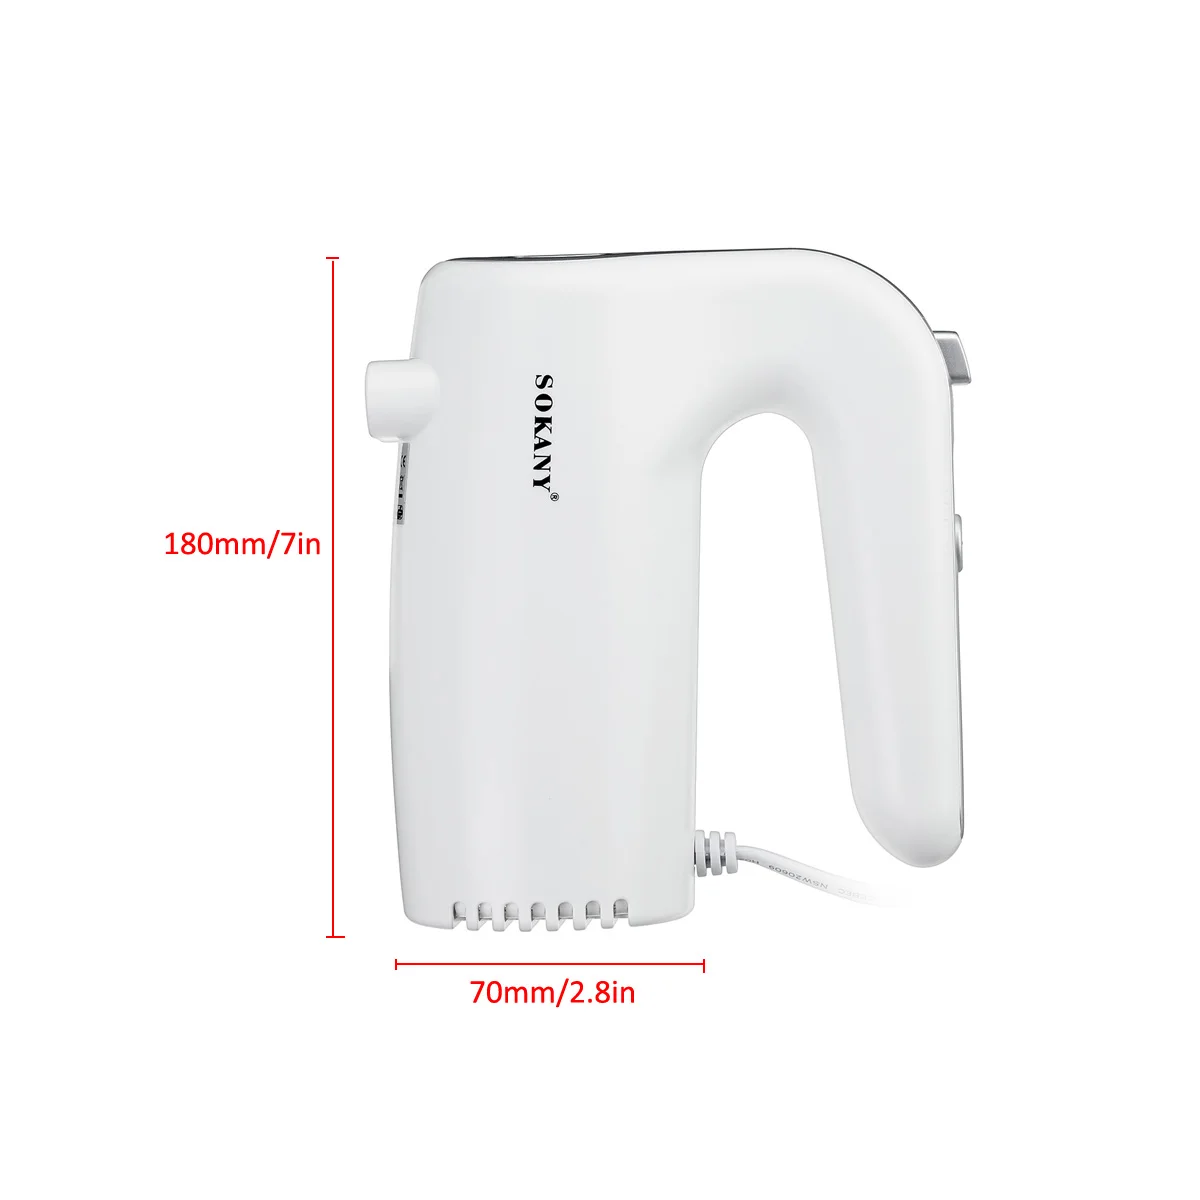 

220v 5 Speed 500W Electric Hand Mixer Whisk Egg Beater Cake Baking Home Handheld Small Automatic Mini Cream Blenders Kitchen